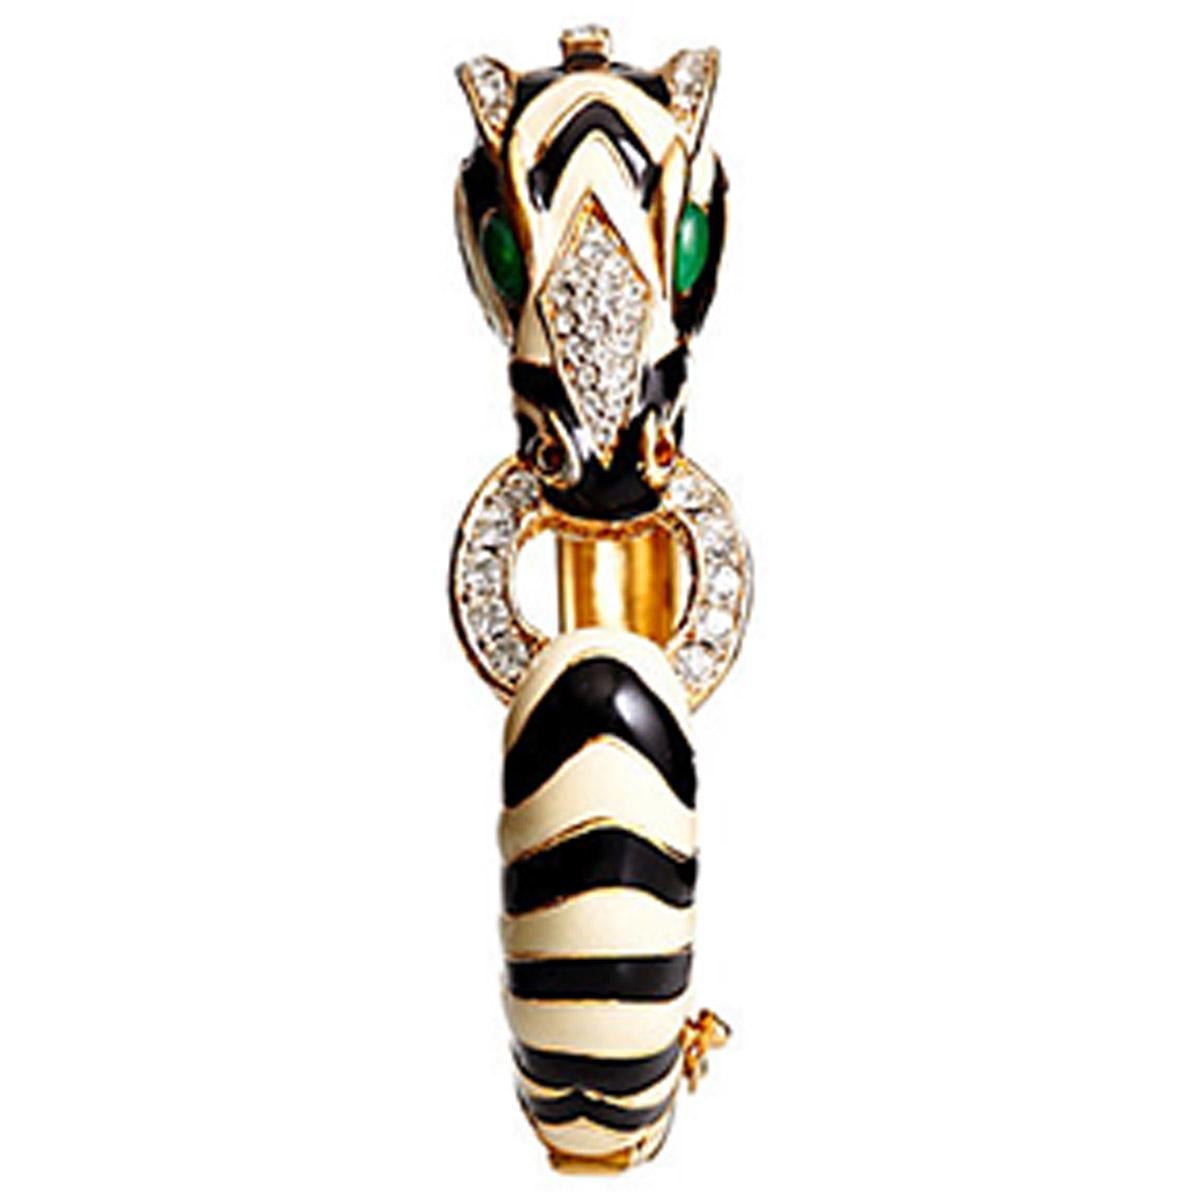 The CINER Zebra Animal Bracelet will be a striking addition to your jewelry collection! 

PLEASE NOTE: The pieces available are not vintage and are not reproductions. 
CINER uses original models to produce our jewelry today.
If you would like to